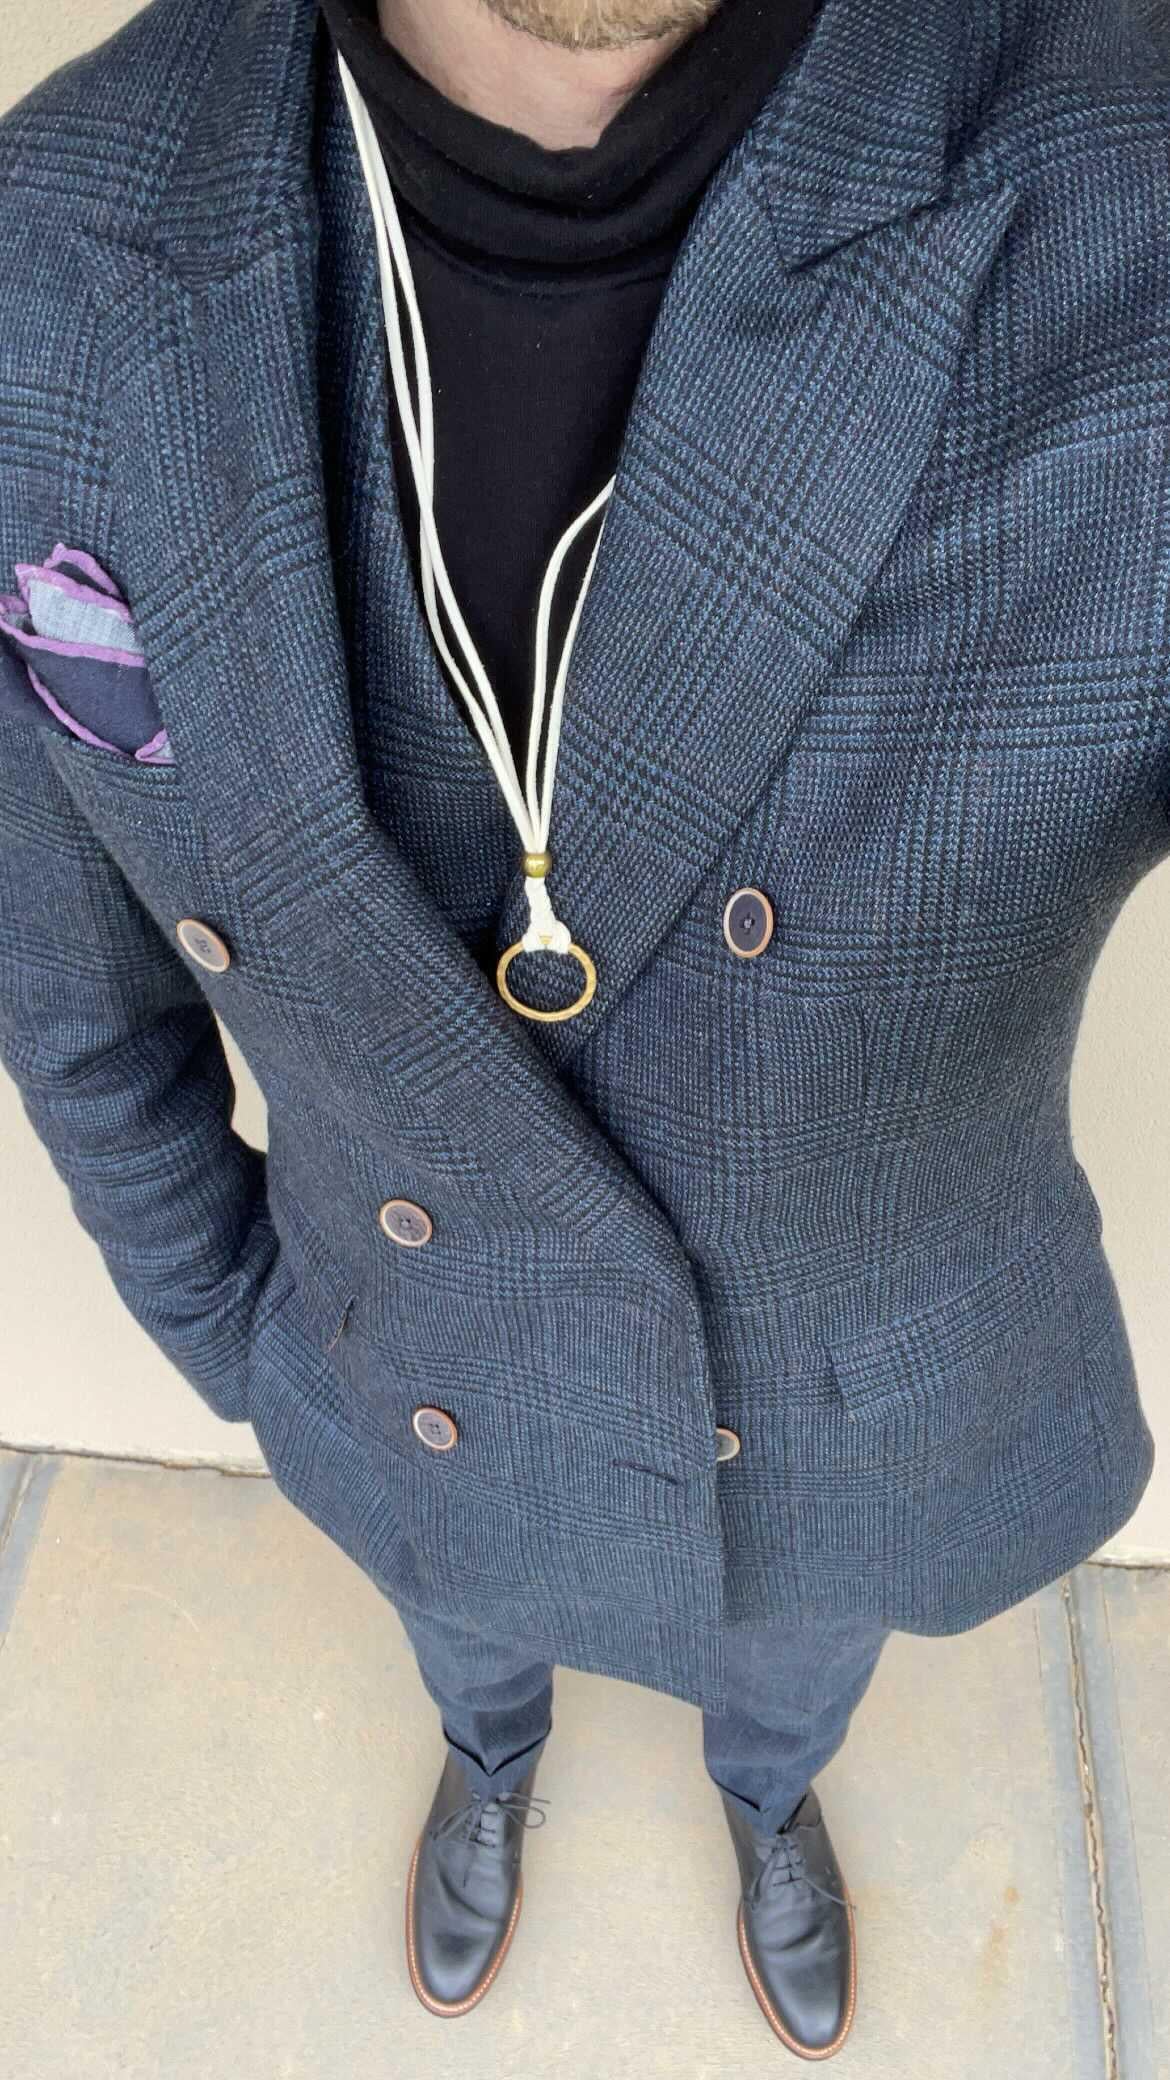 Story Behind The Jewelry
There is just something very masculine about a cord around and gentleman's neck, it enhances the outfit's overall elegance. The pendant is a hammered 14K gold circle. Circles are a universal symbol for wholeness and